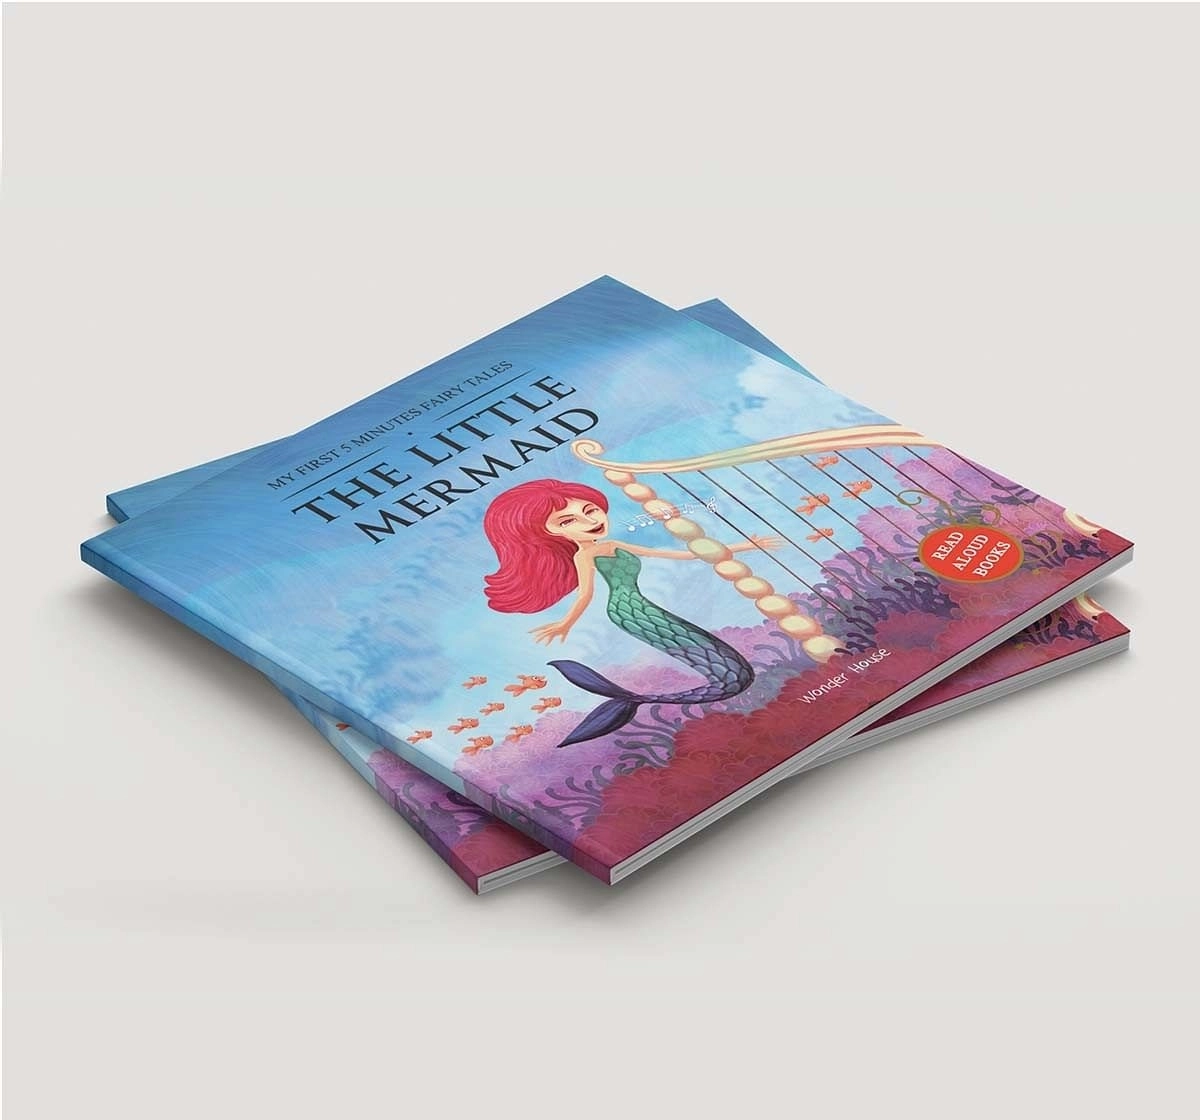 Wonder House Books My First 5 Minutes Fairy Tales The Little Mermaid Paperback Multicolor 3Y+